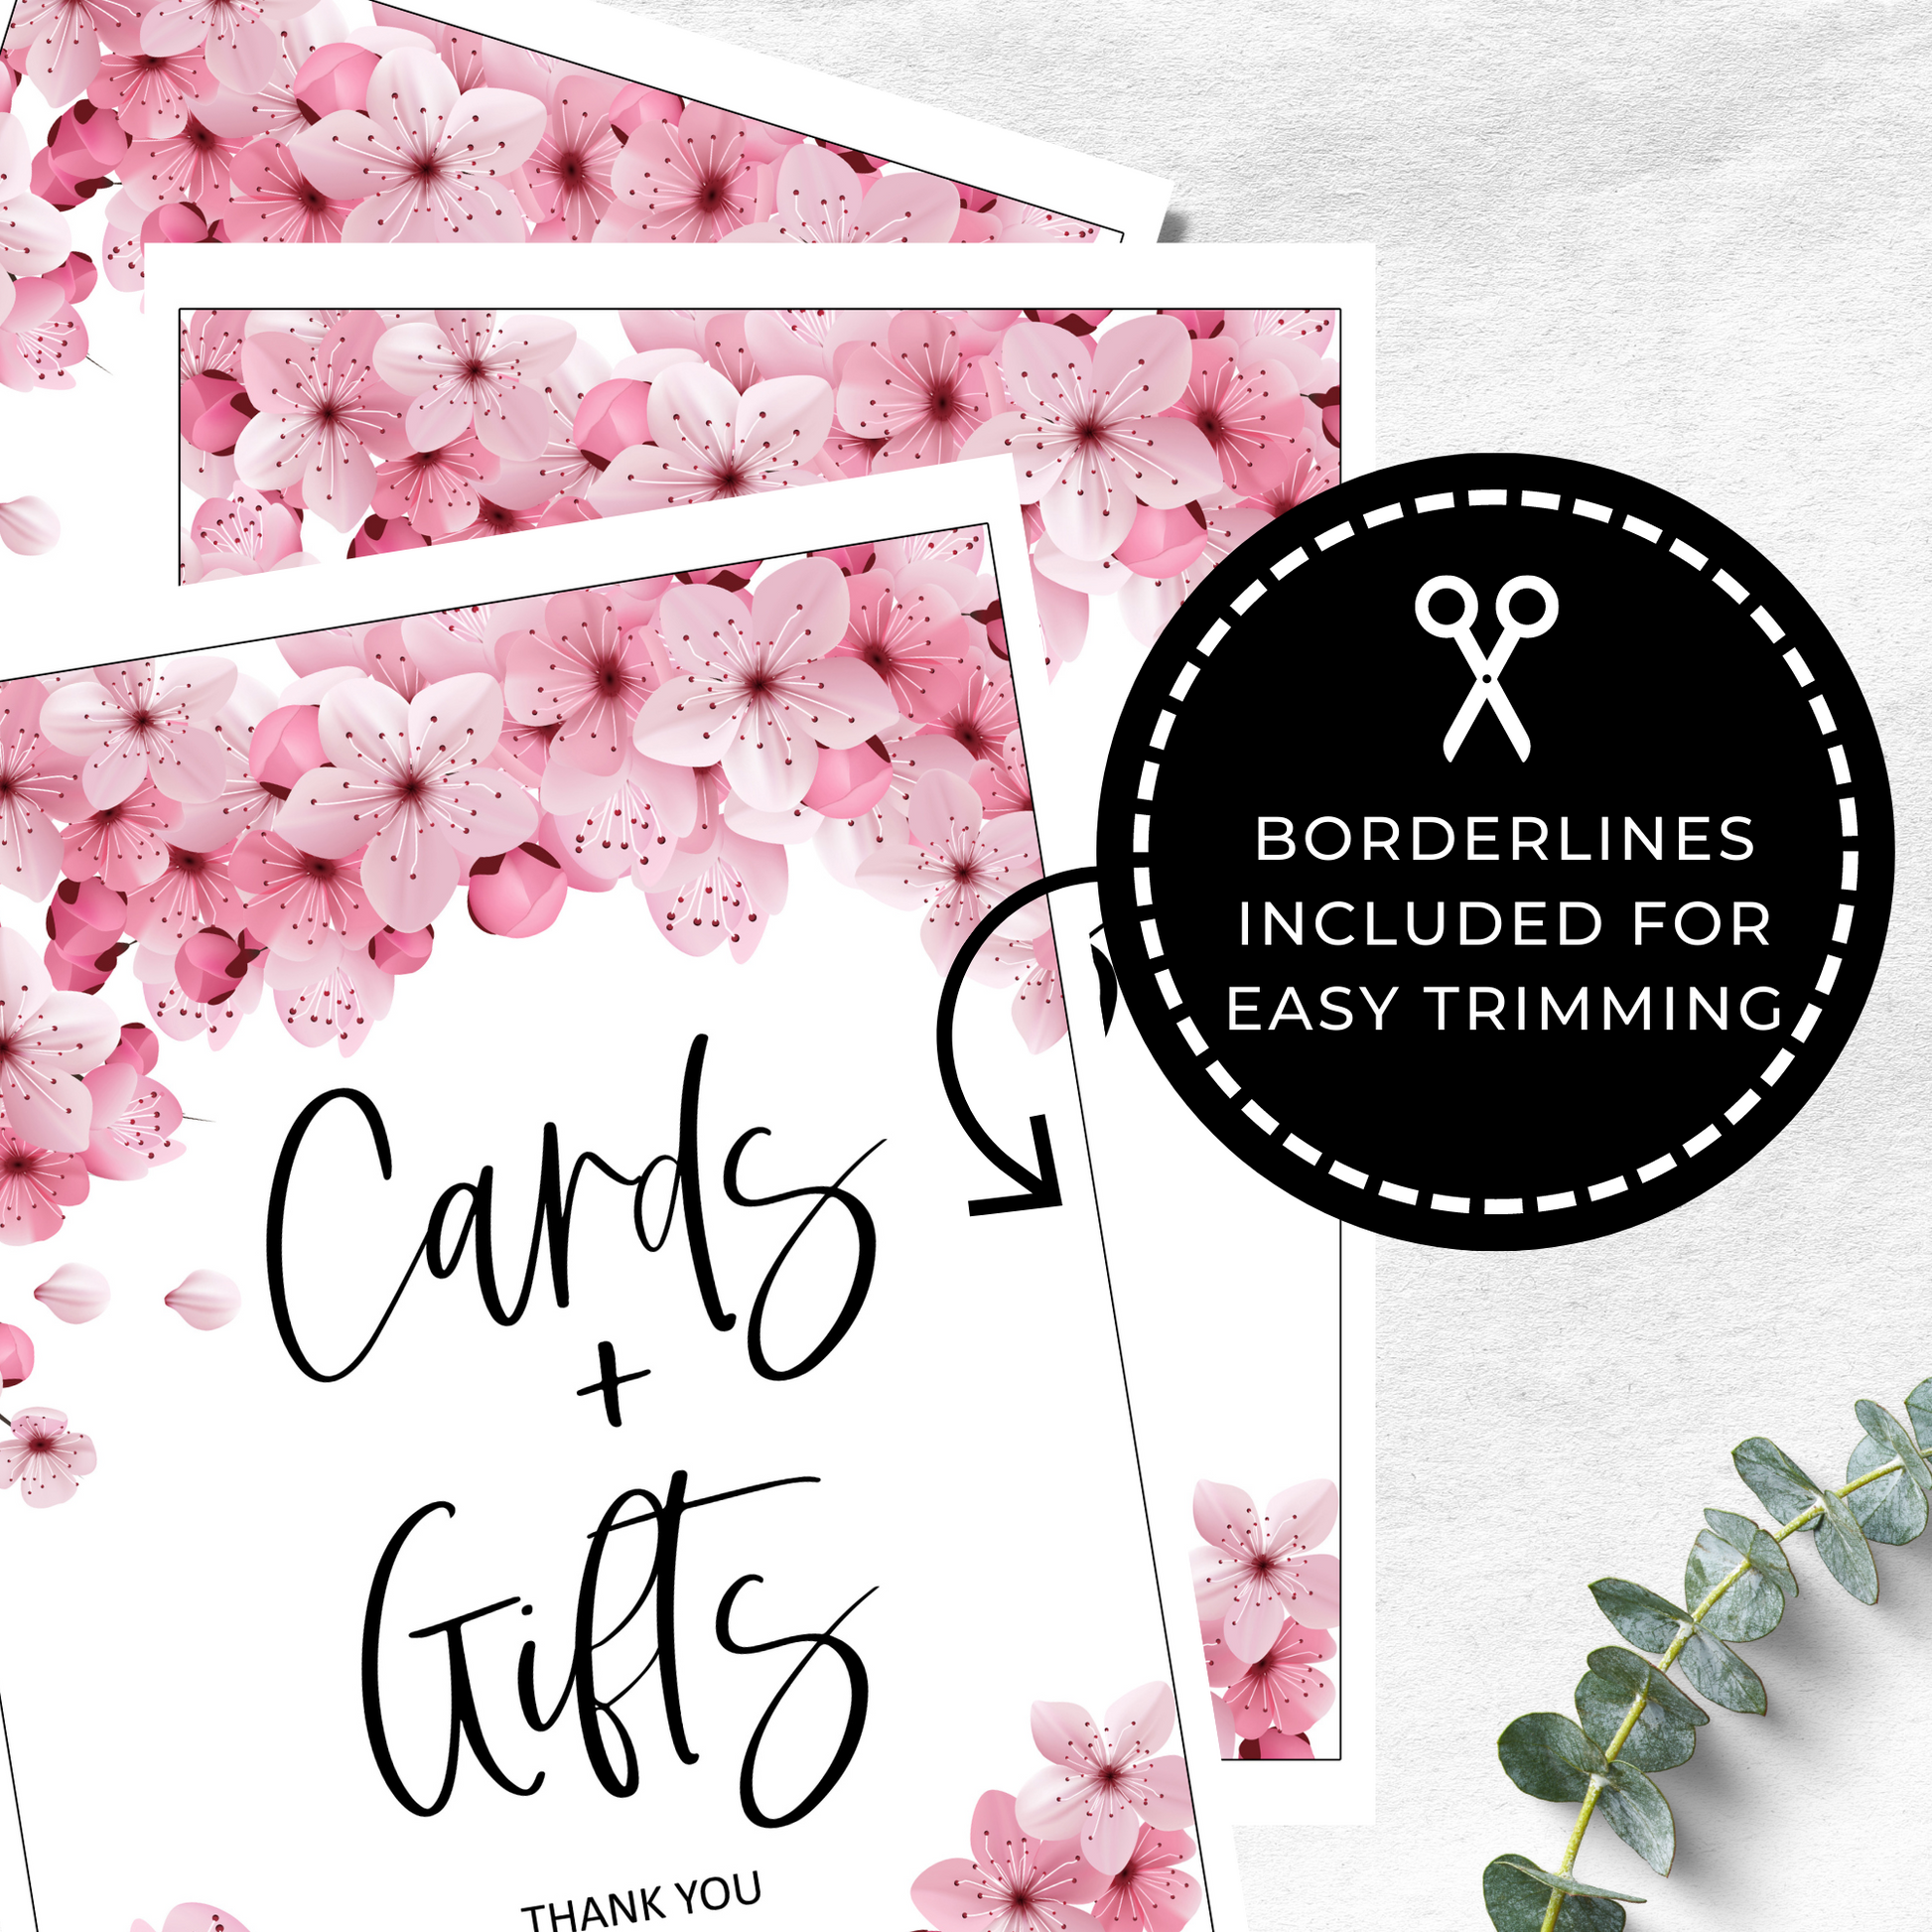 Cards and Gifts Wedding Table Sign - Pink Floral